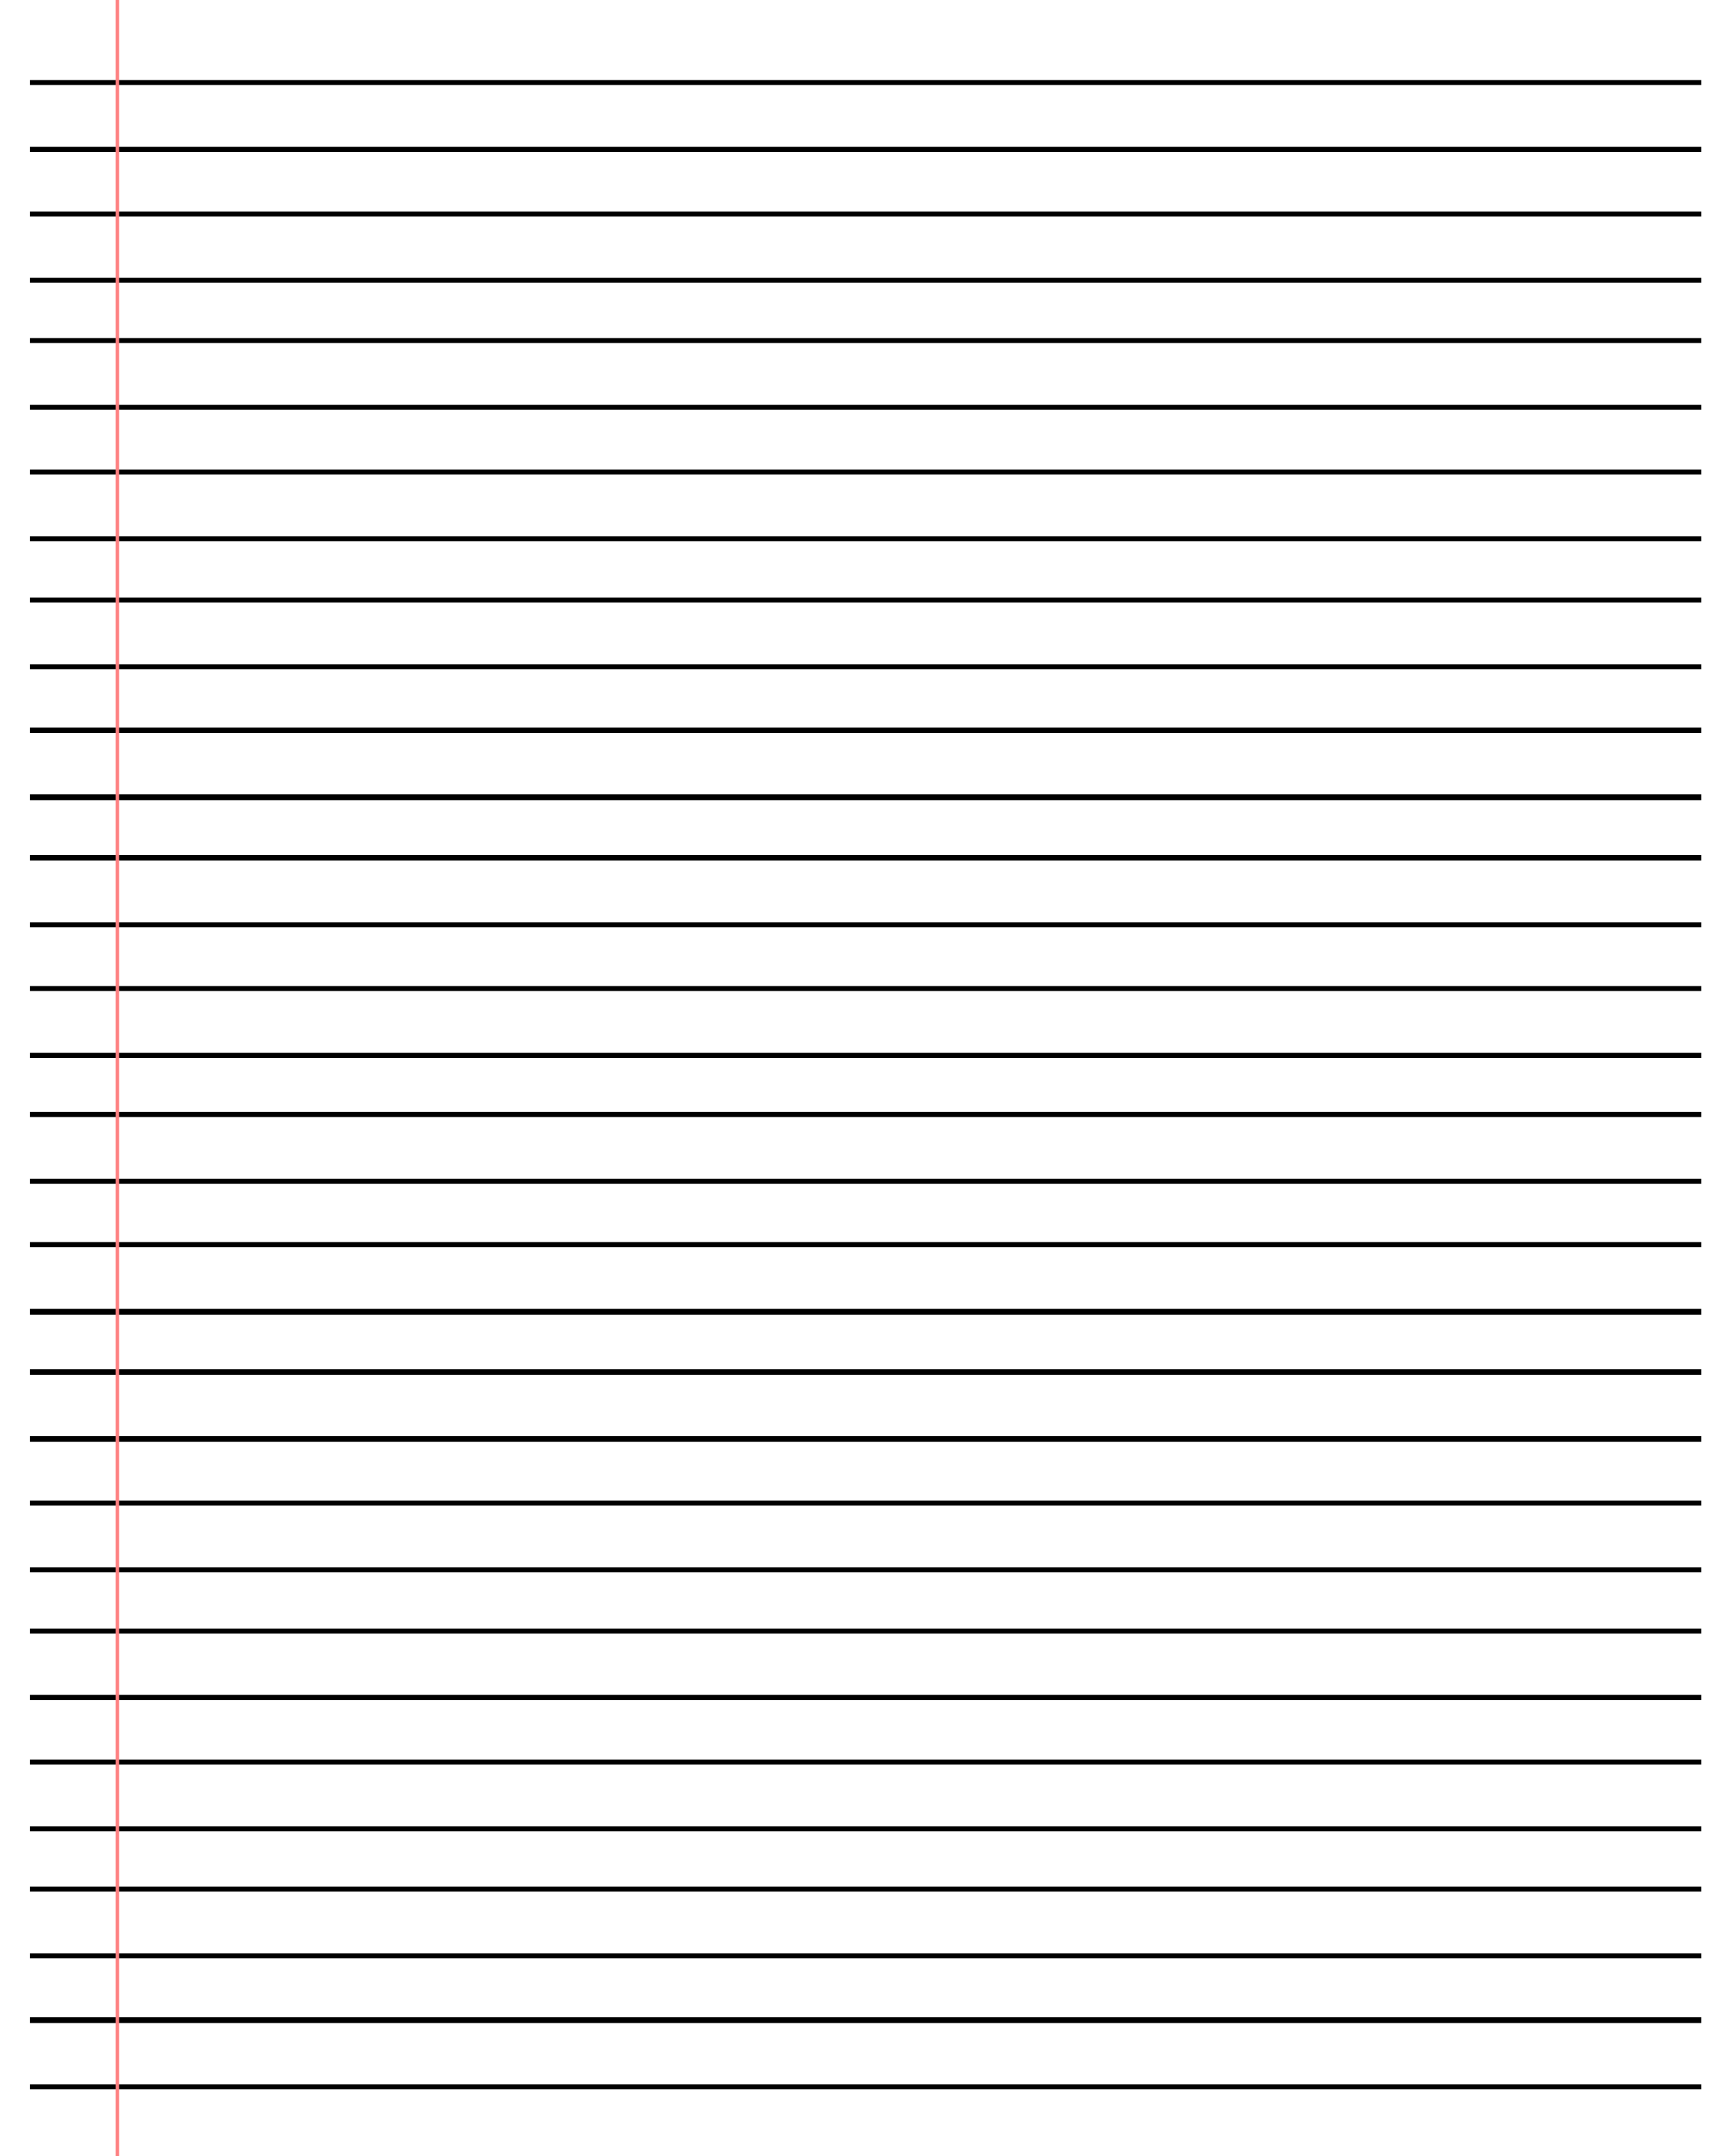 Ruled Paper Template Word - Sample Design Templates